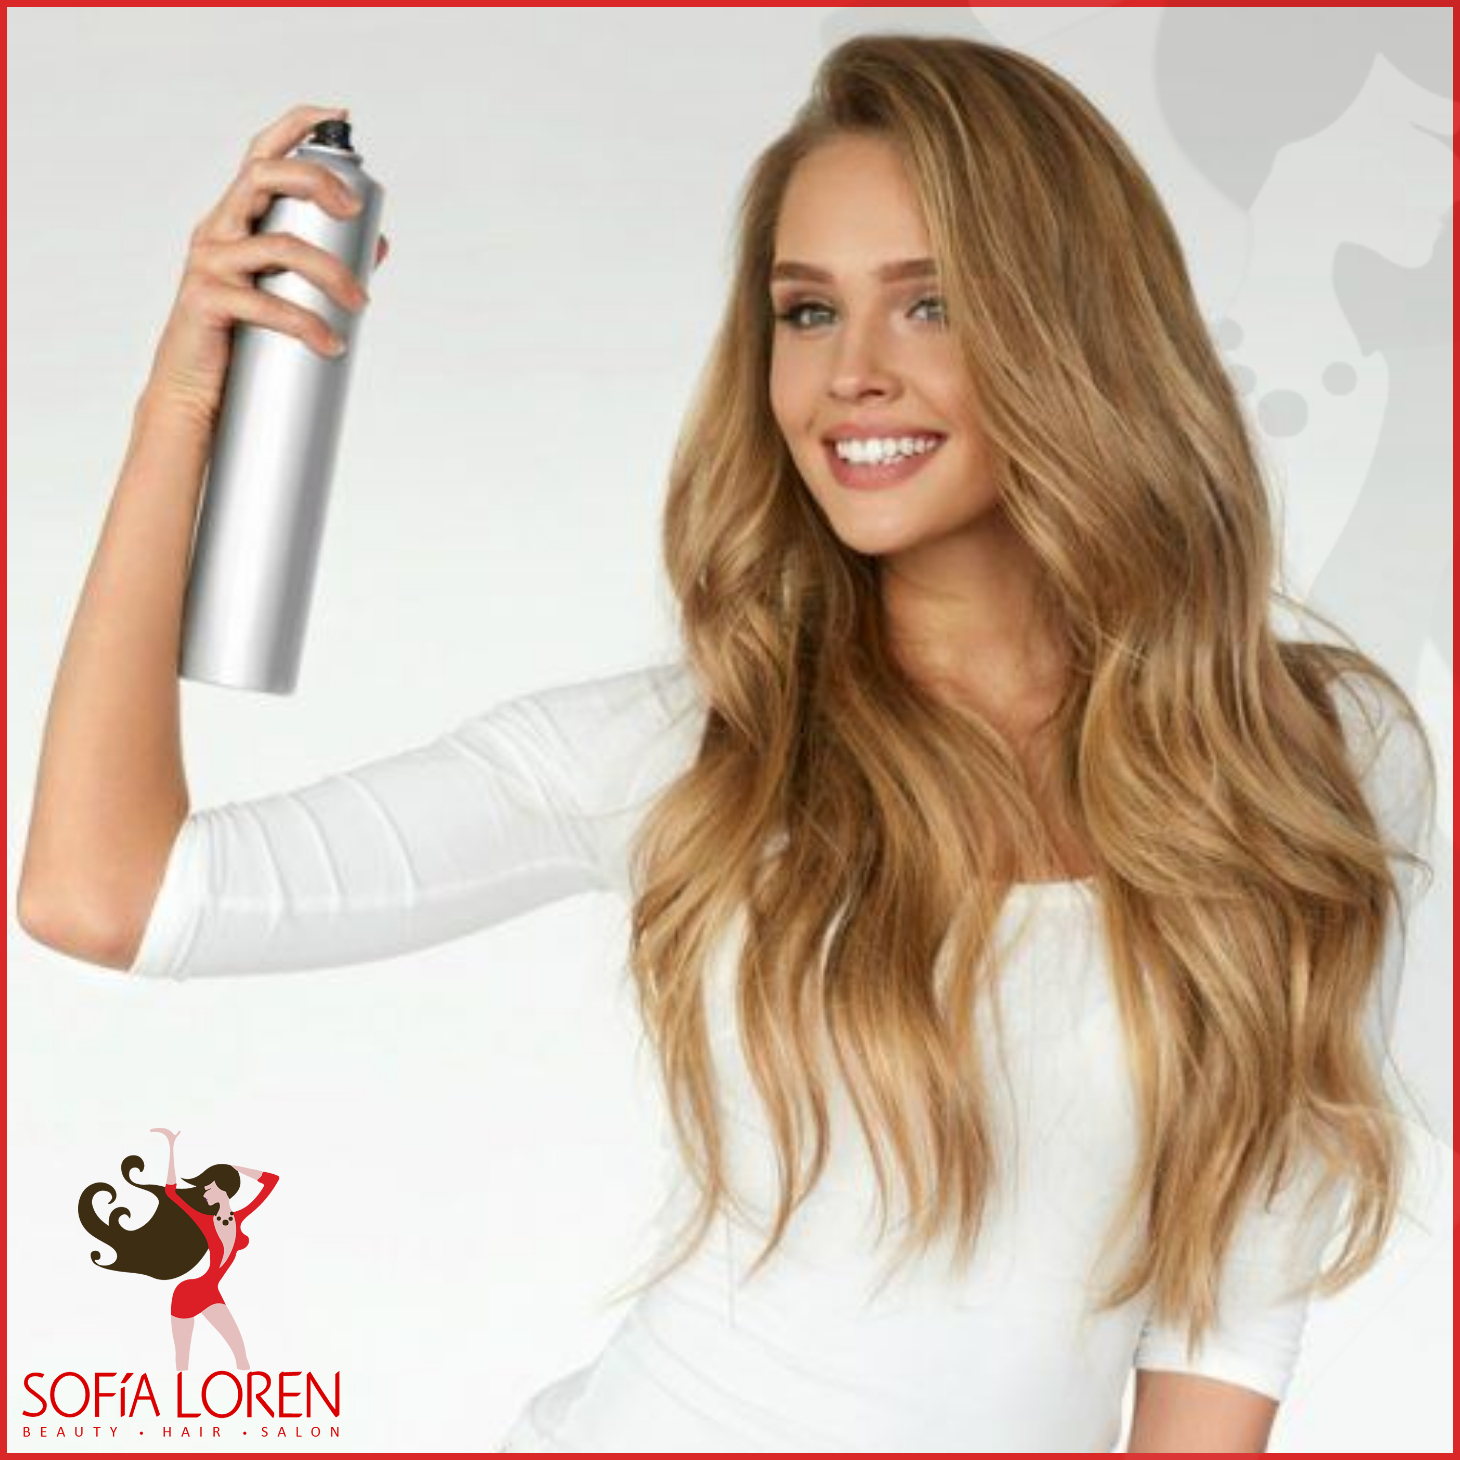 Is Dry Shampoo Bad for Your Hair? Two Trichologists Tell Truth - Sofia Loren